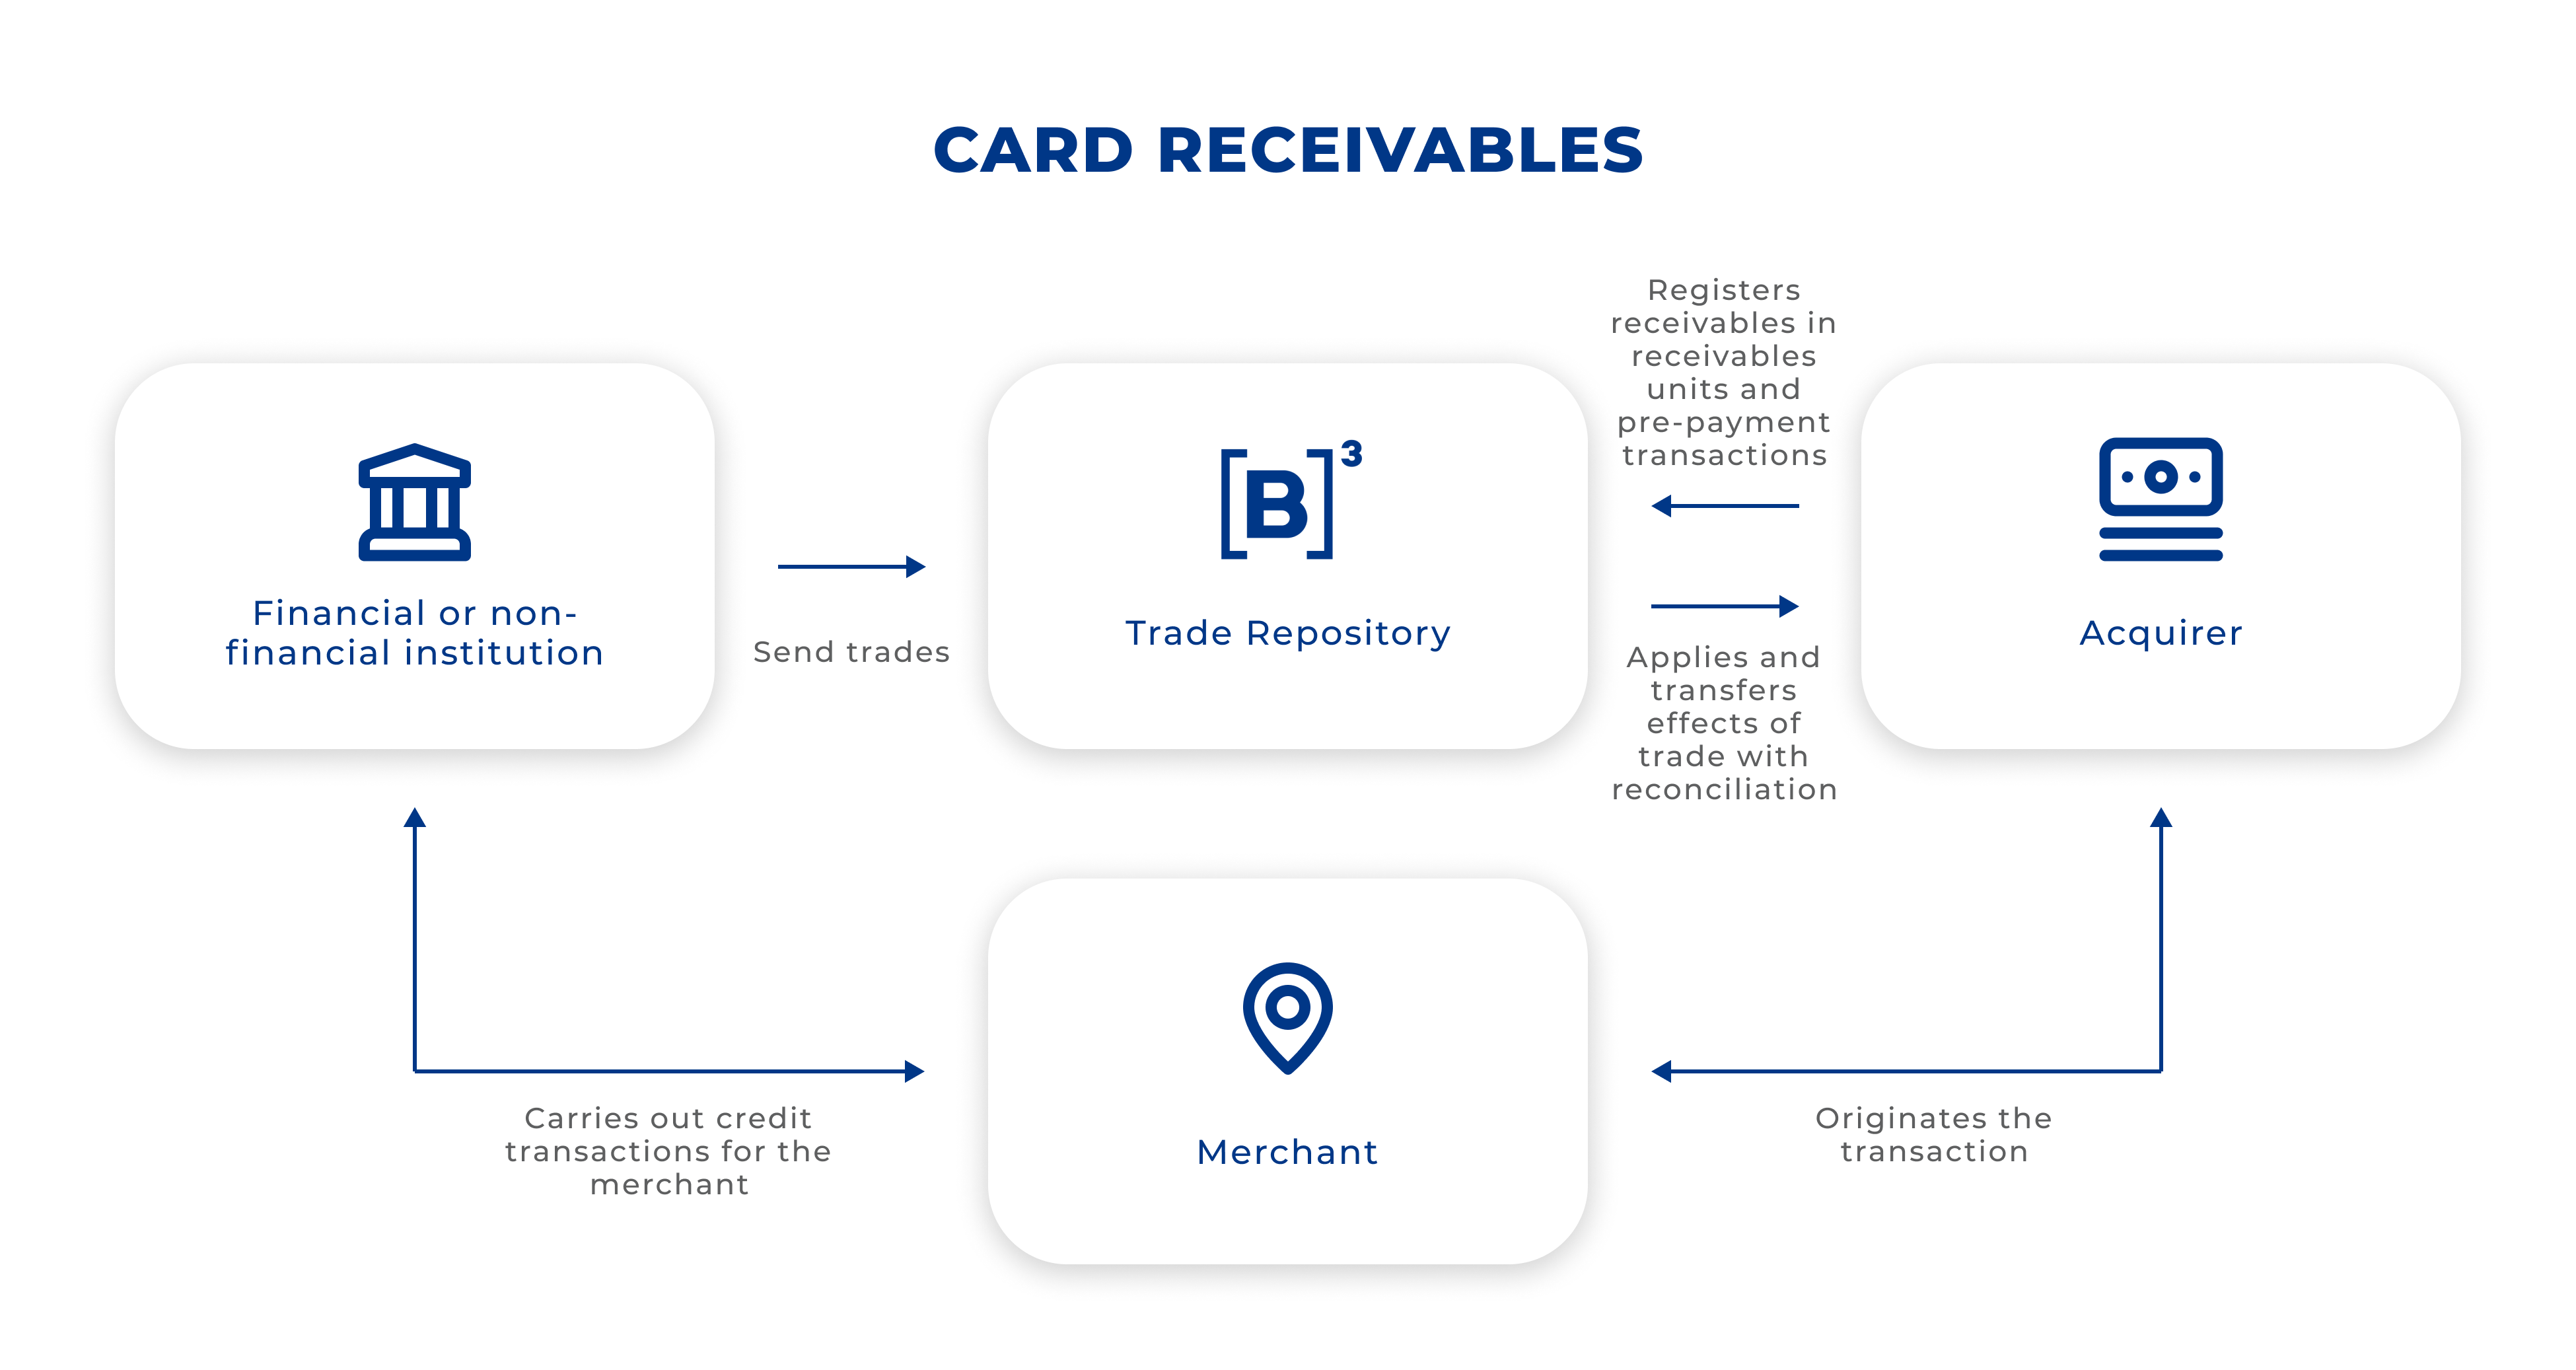 The image demonstrates the Card Receivables Market Flow and will be explained in the expandable link bellow: Card Receivables Market Flow.